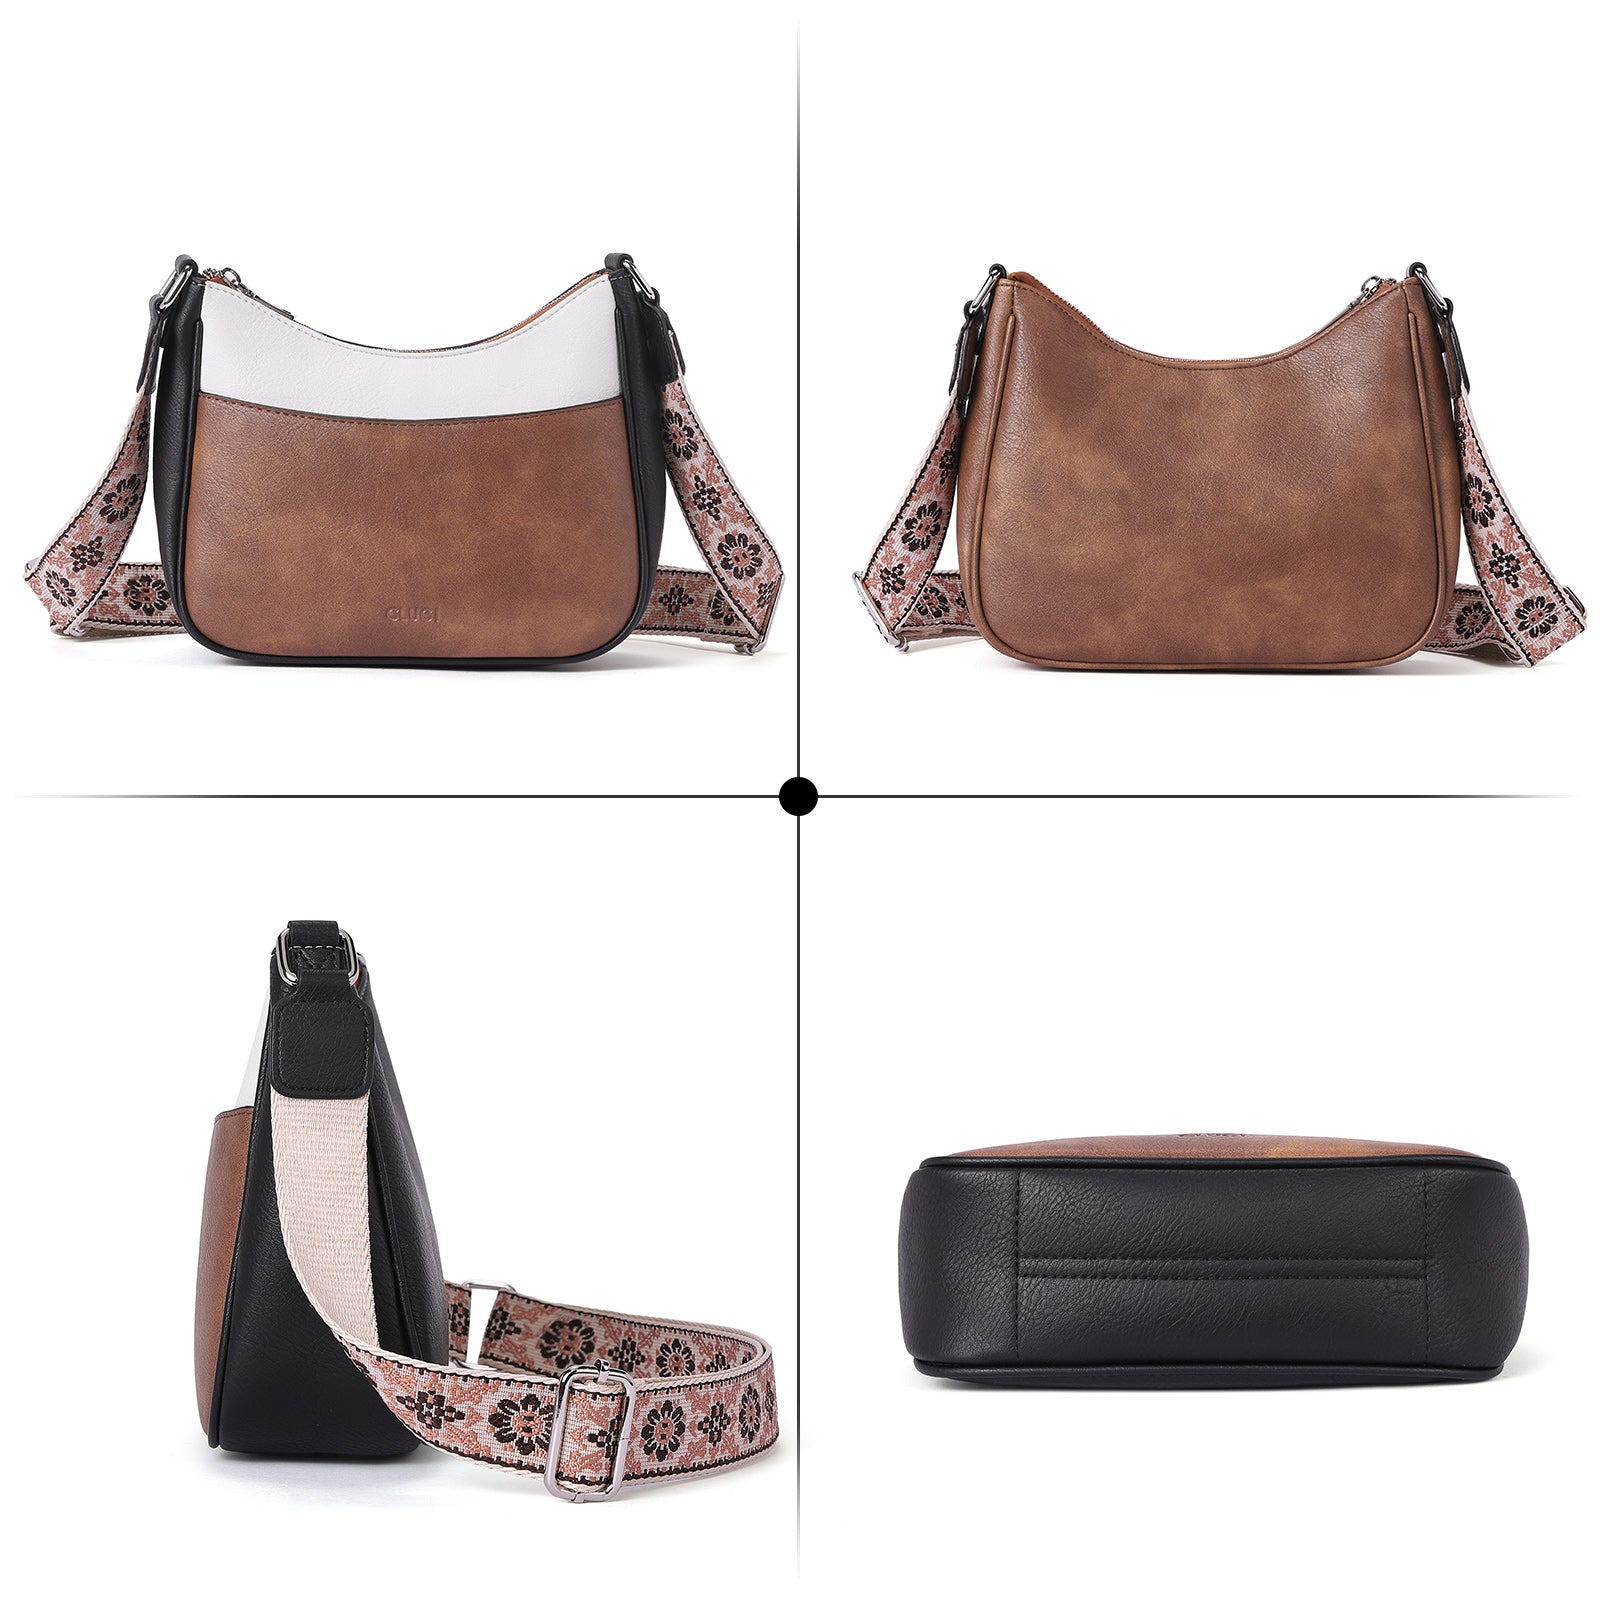 Trendy Crossbody Purses for Women with Adjustable Strap